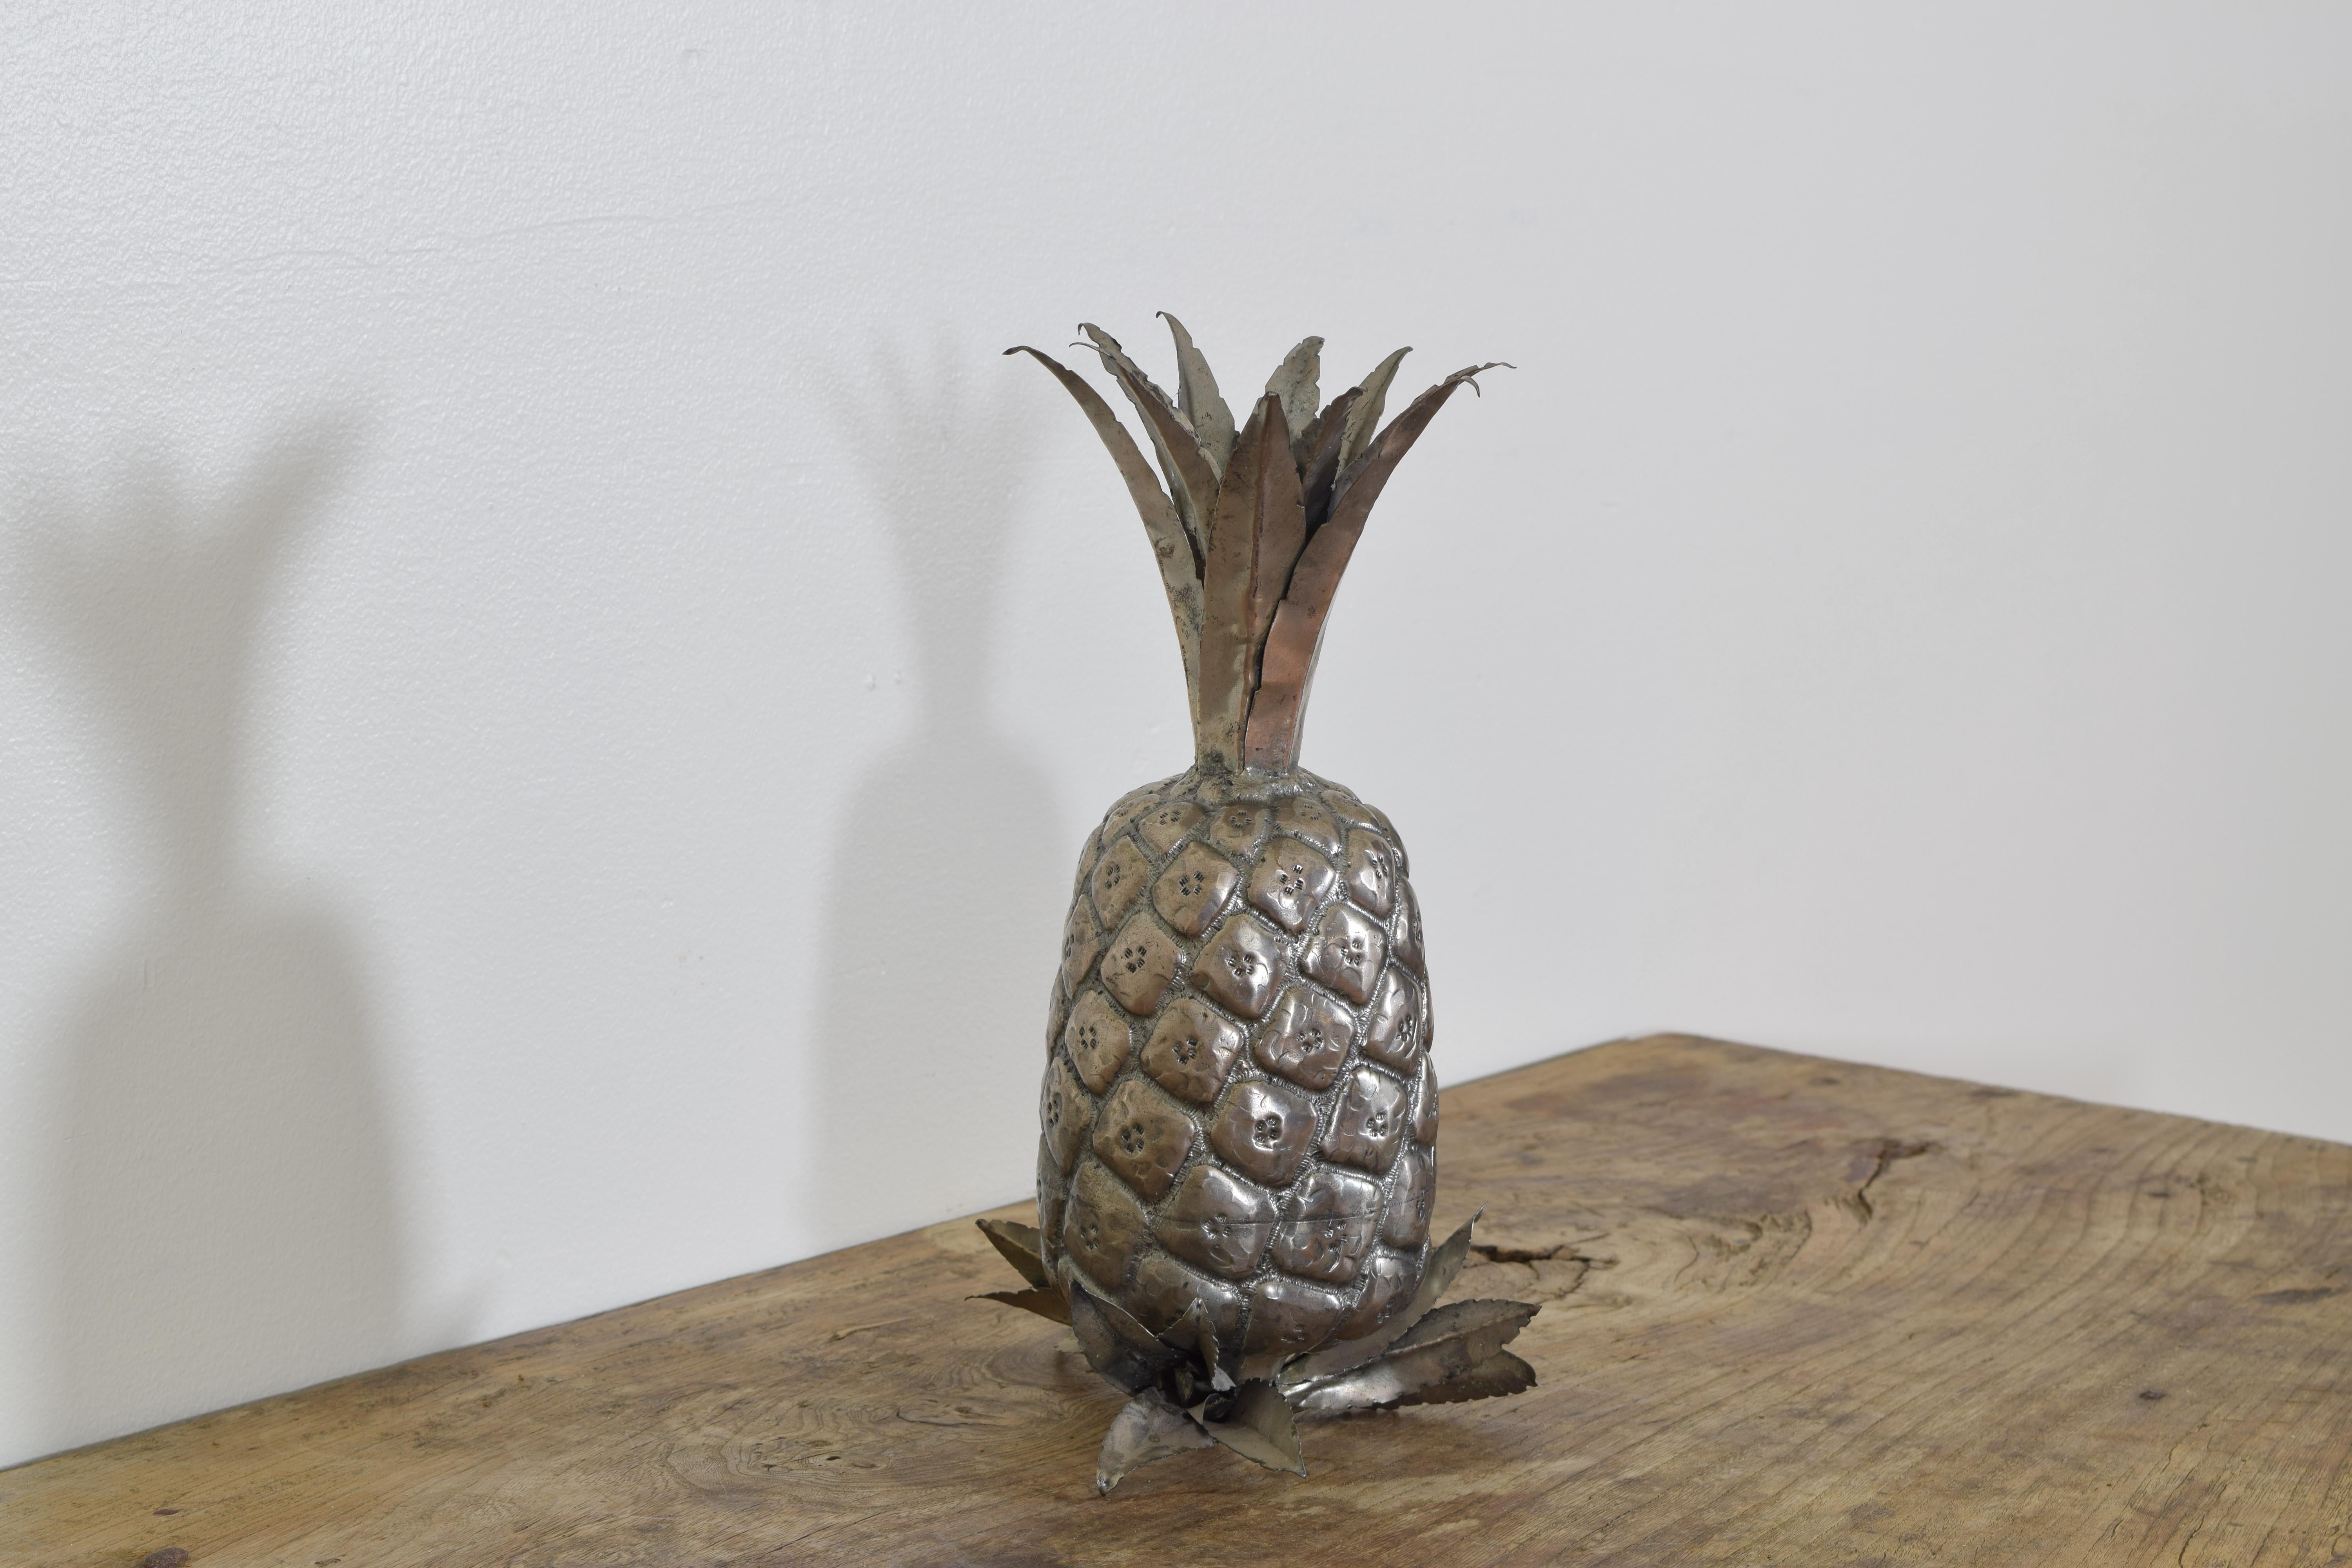 The miniature pineapple well cast and plated in silver, with a leaf-form lower section serving as a stand.